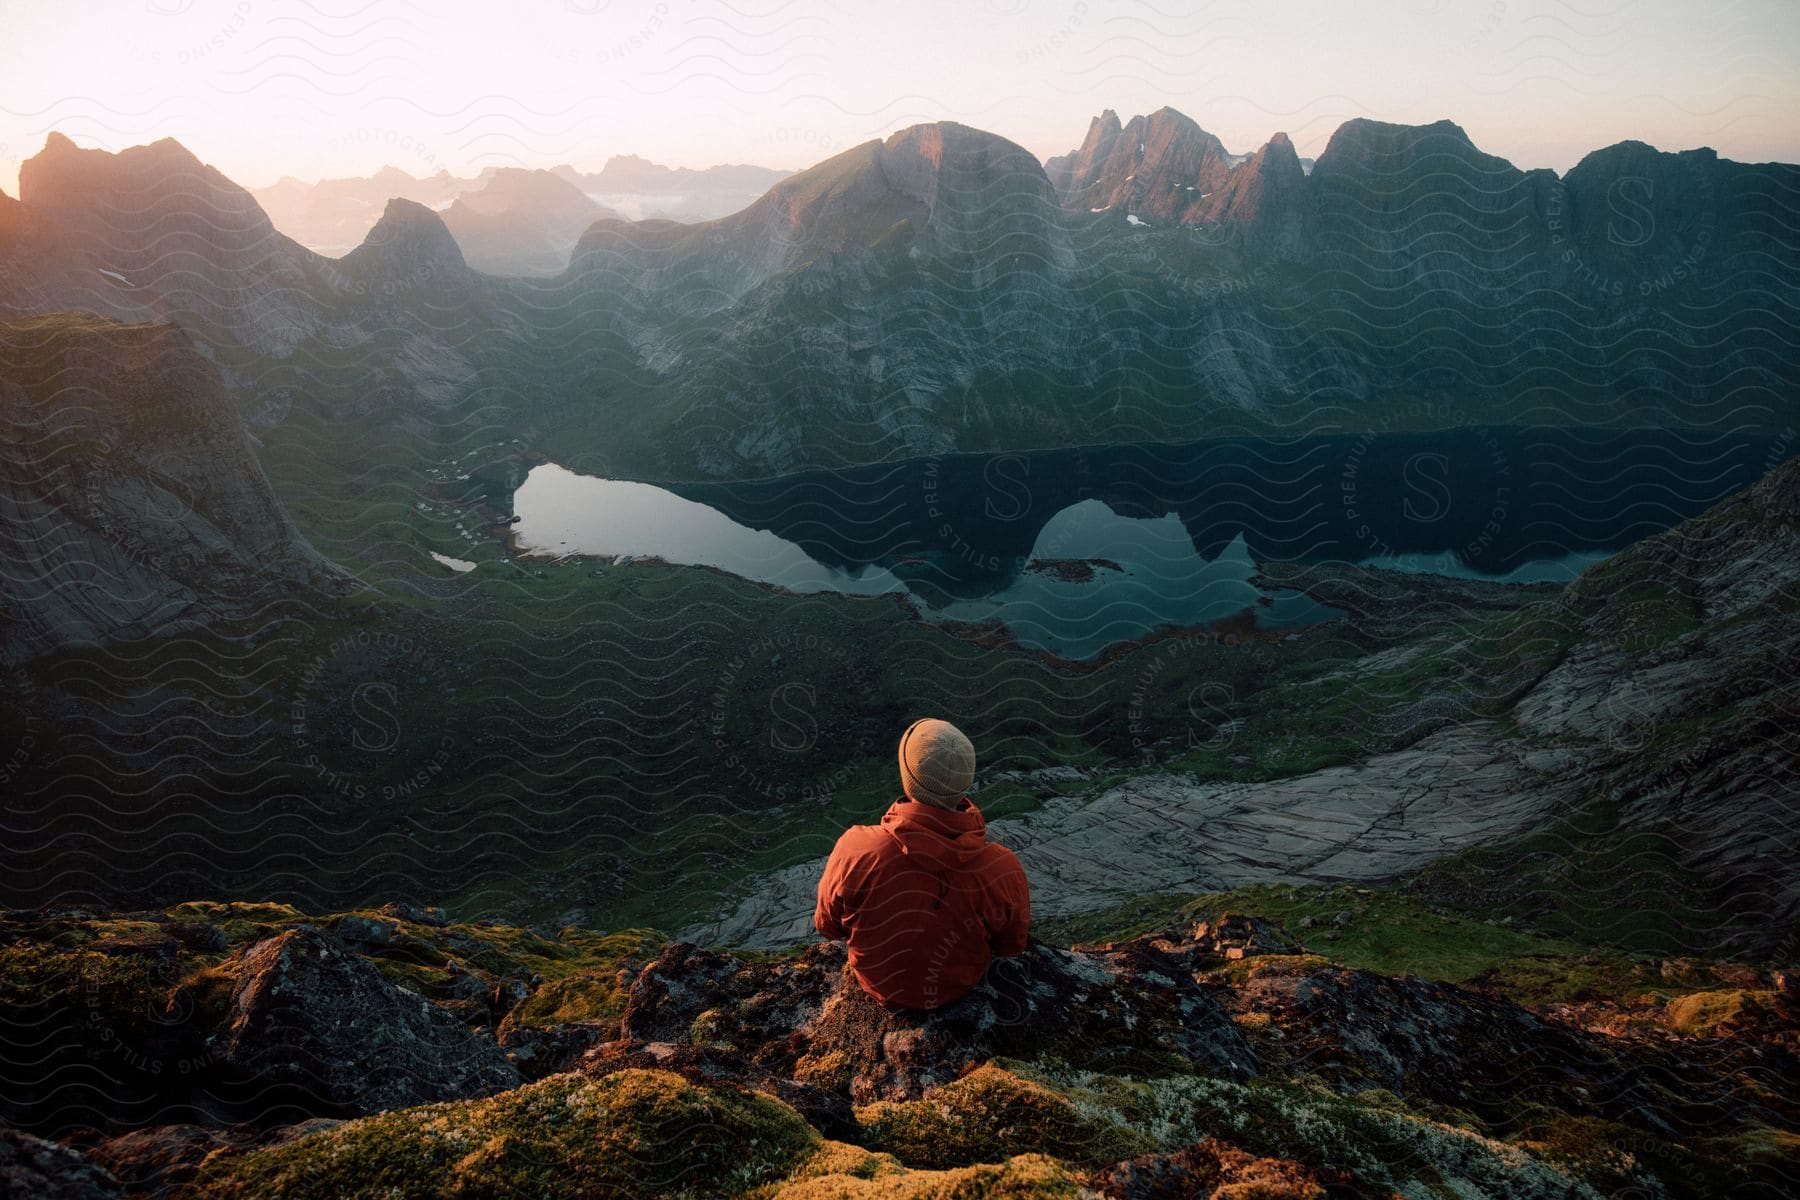 Stock photo of a person sits on a mountain top with other mountains and a lake before them